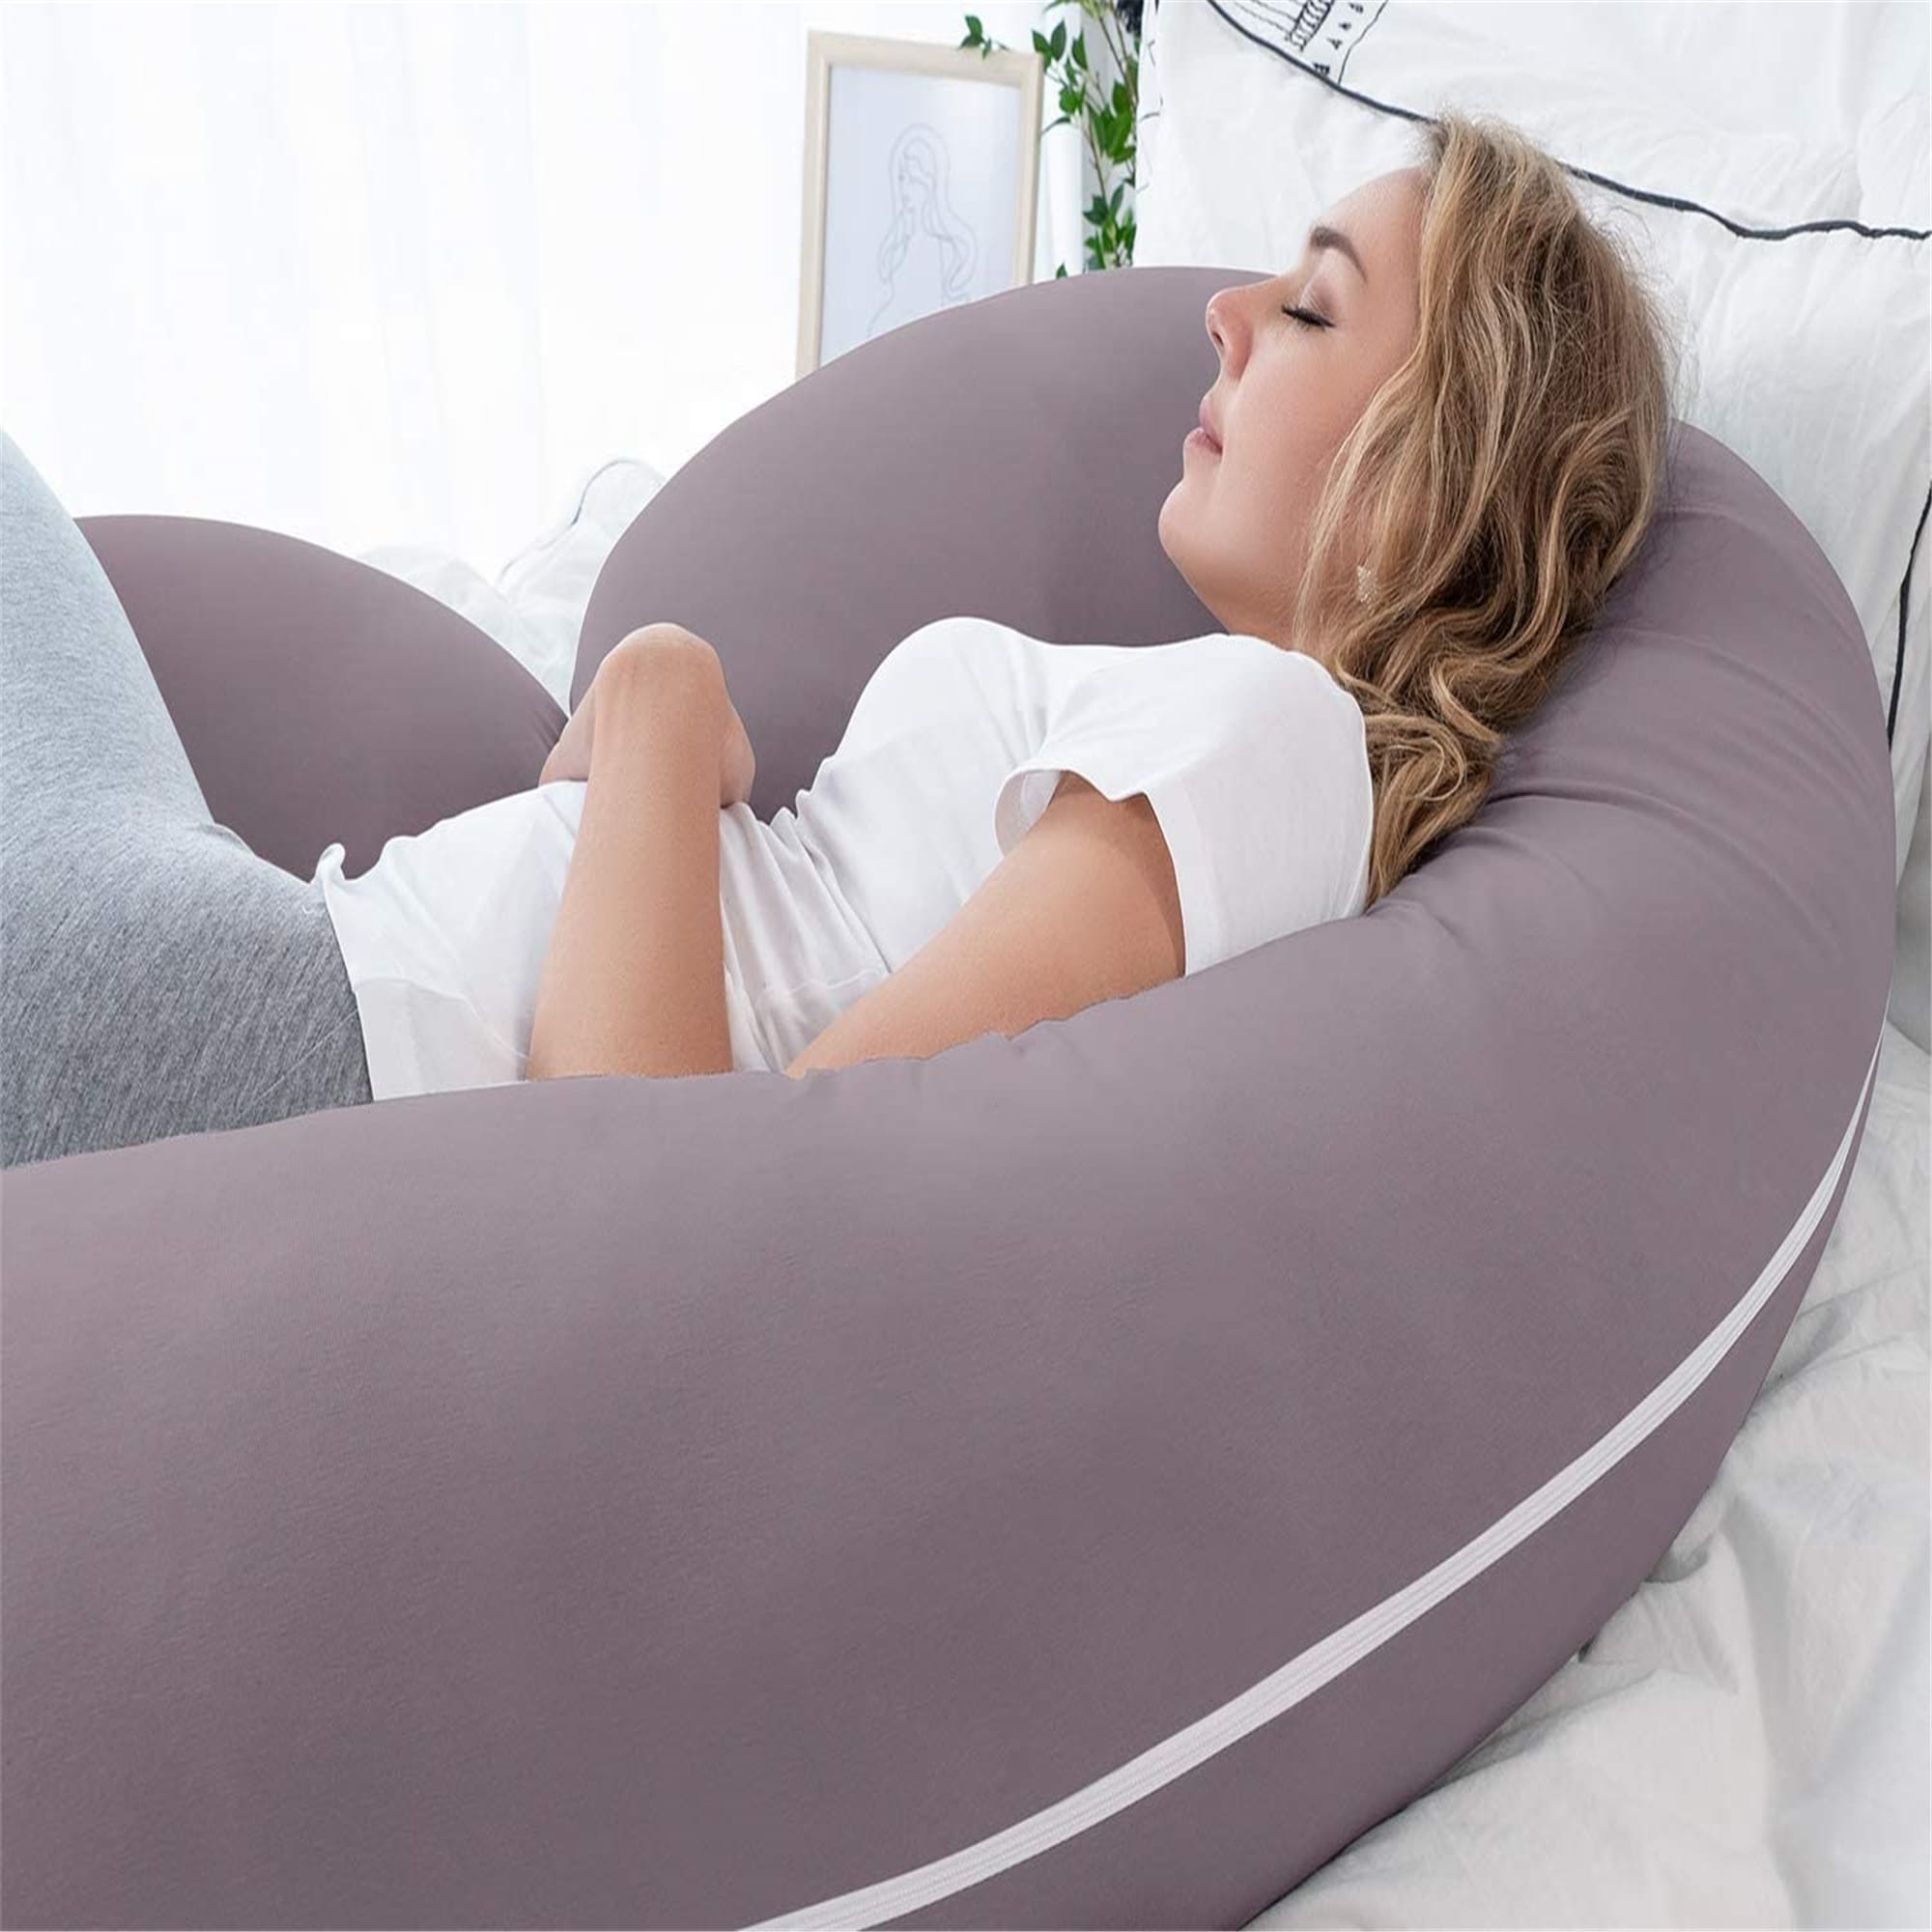 https://ak1.ostkcdn.com/images/products/is/images/direct/621d89c0a00ba63e9ec8319d9f24b291d3f37987/Pregnancy-Pillow%2CMaternity-Body-Pillow-for-Pregnant-Women%2CC-Shaped-Full-Body-Pillow-with-Zippers-Jersey-Cover.jpg